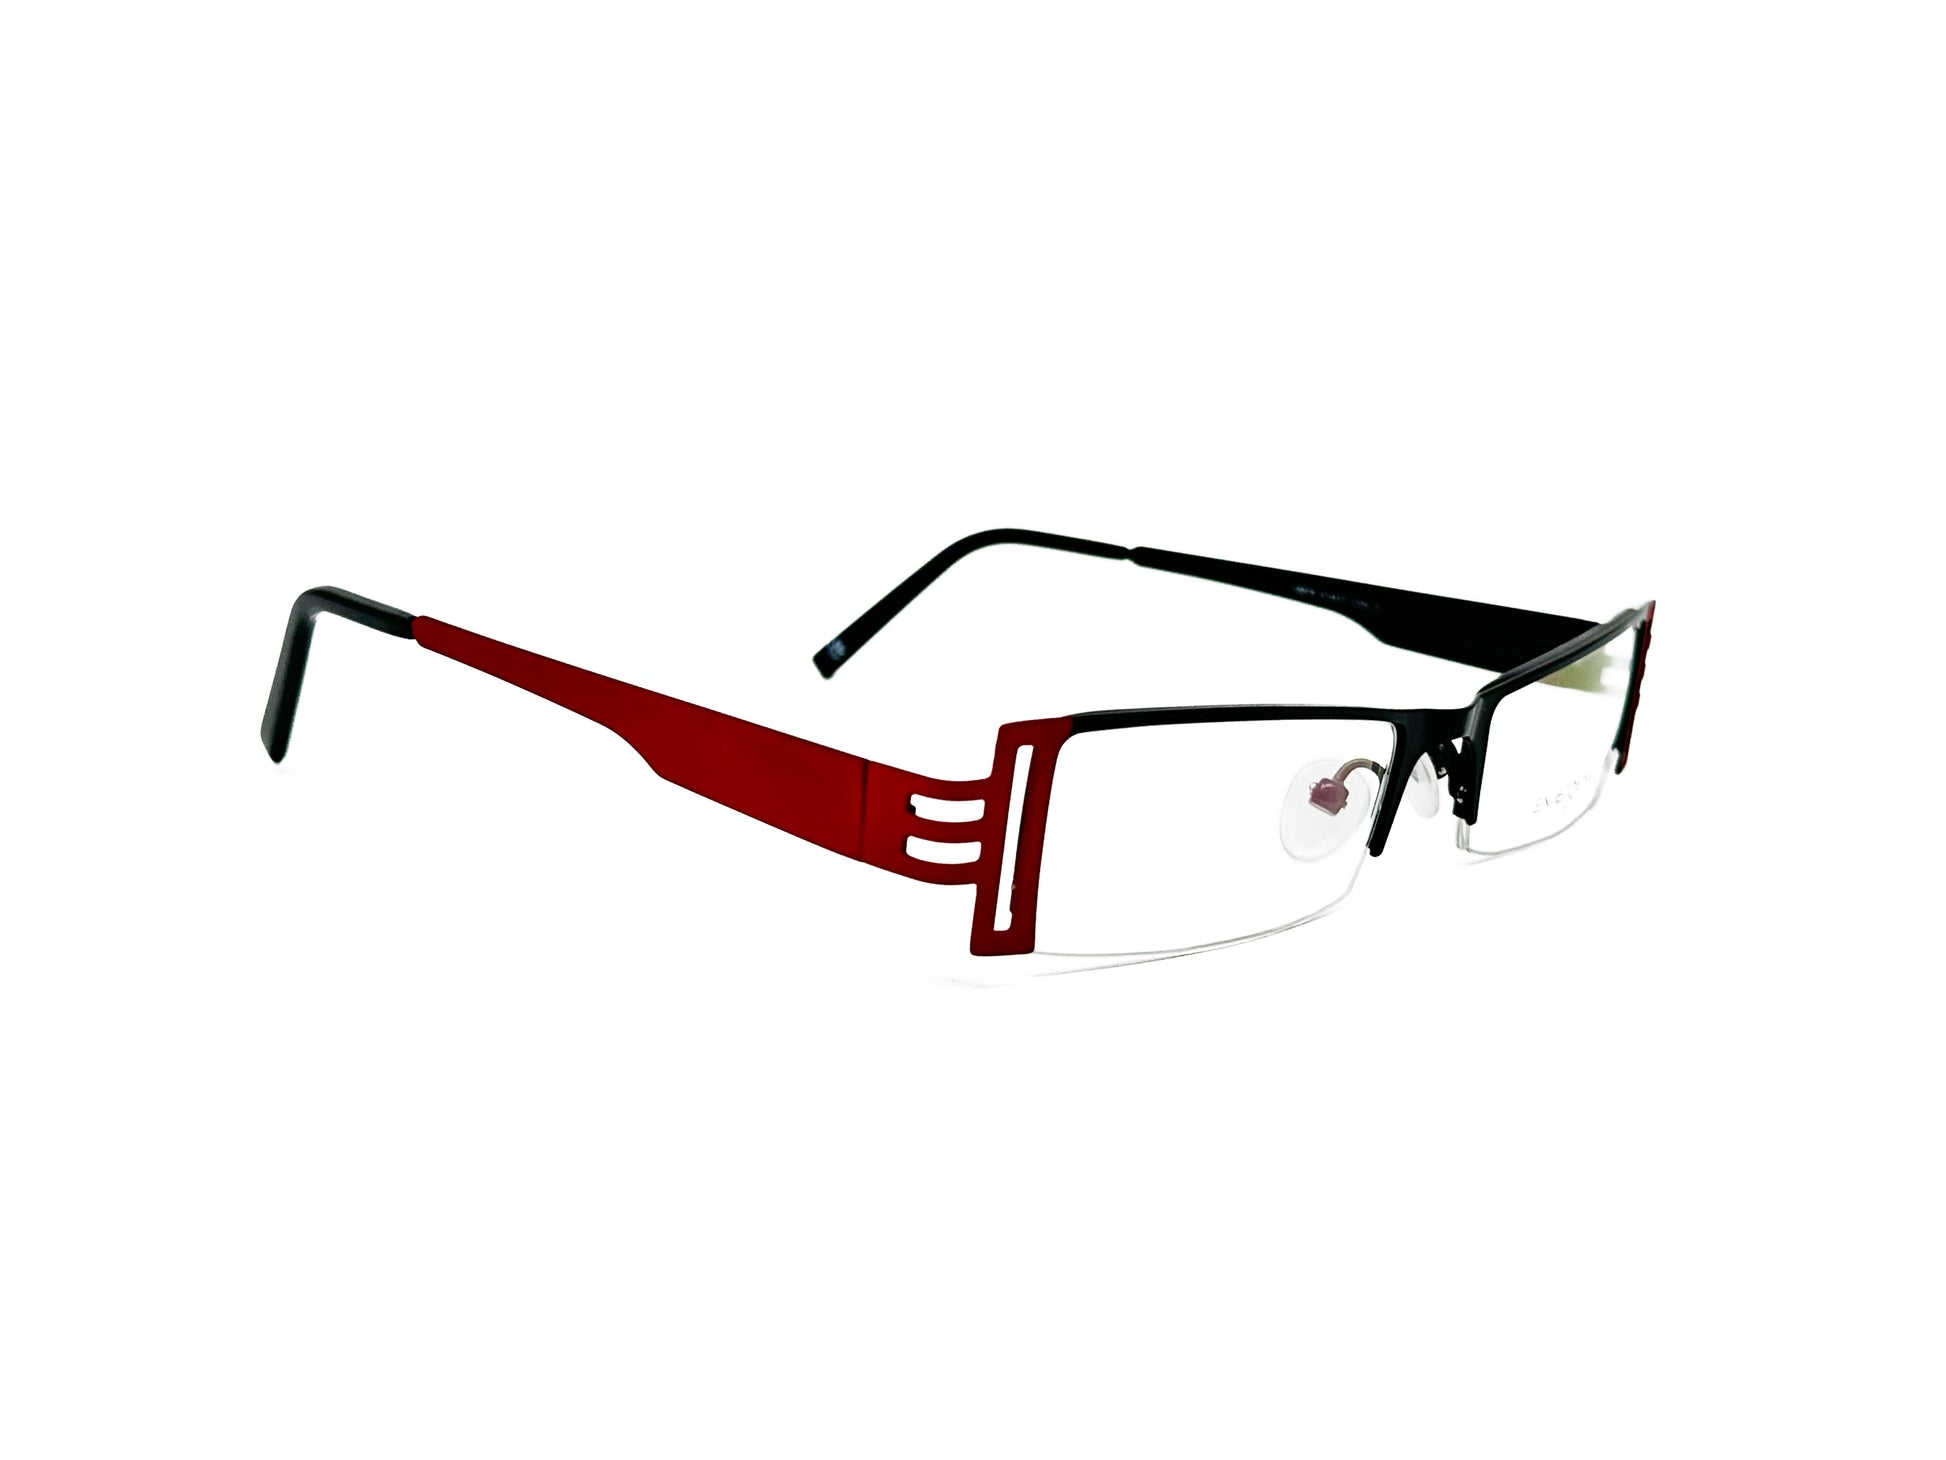 Emergence thin, rectangular, metal, half-rim optical frame with rectangular cutouts. Model: 10073. Color: 2 - Red. with black front. Side view.